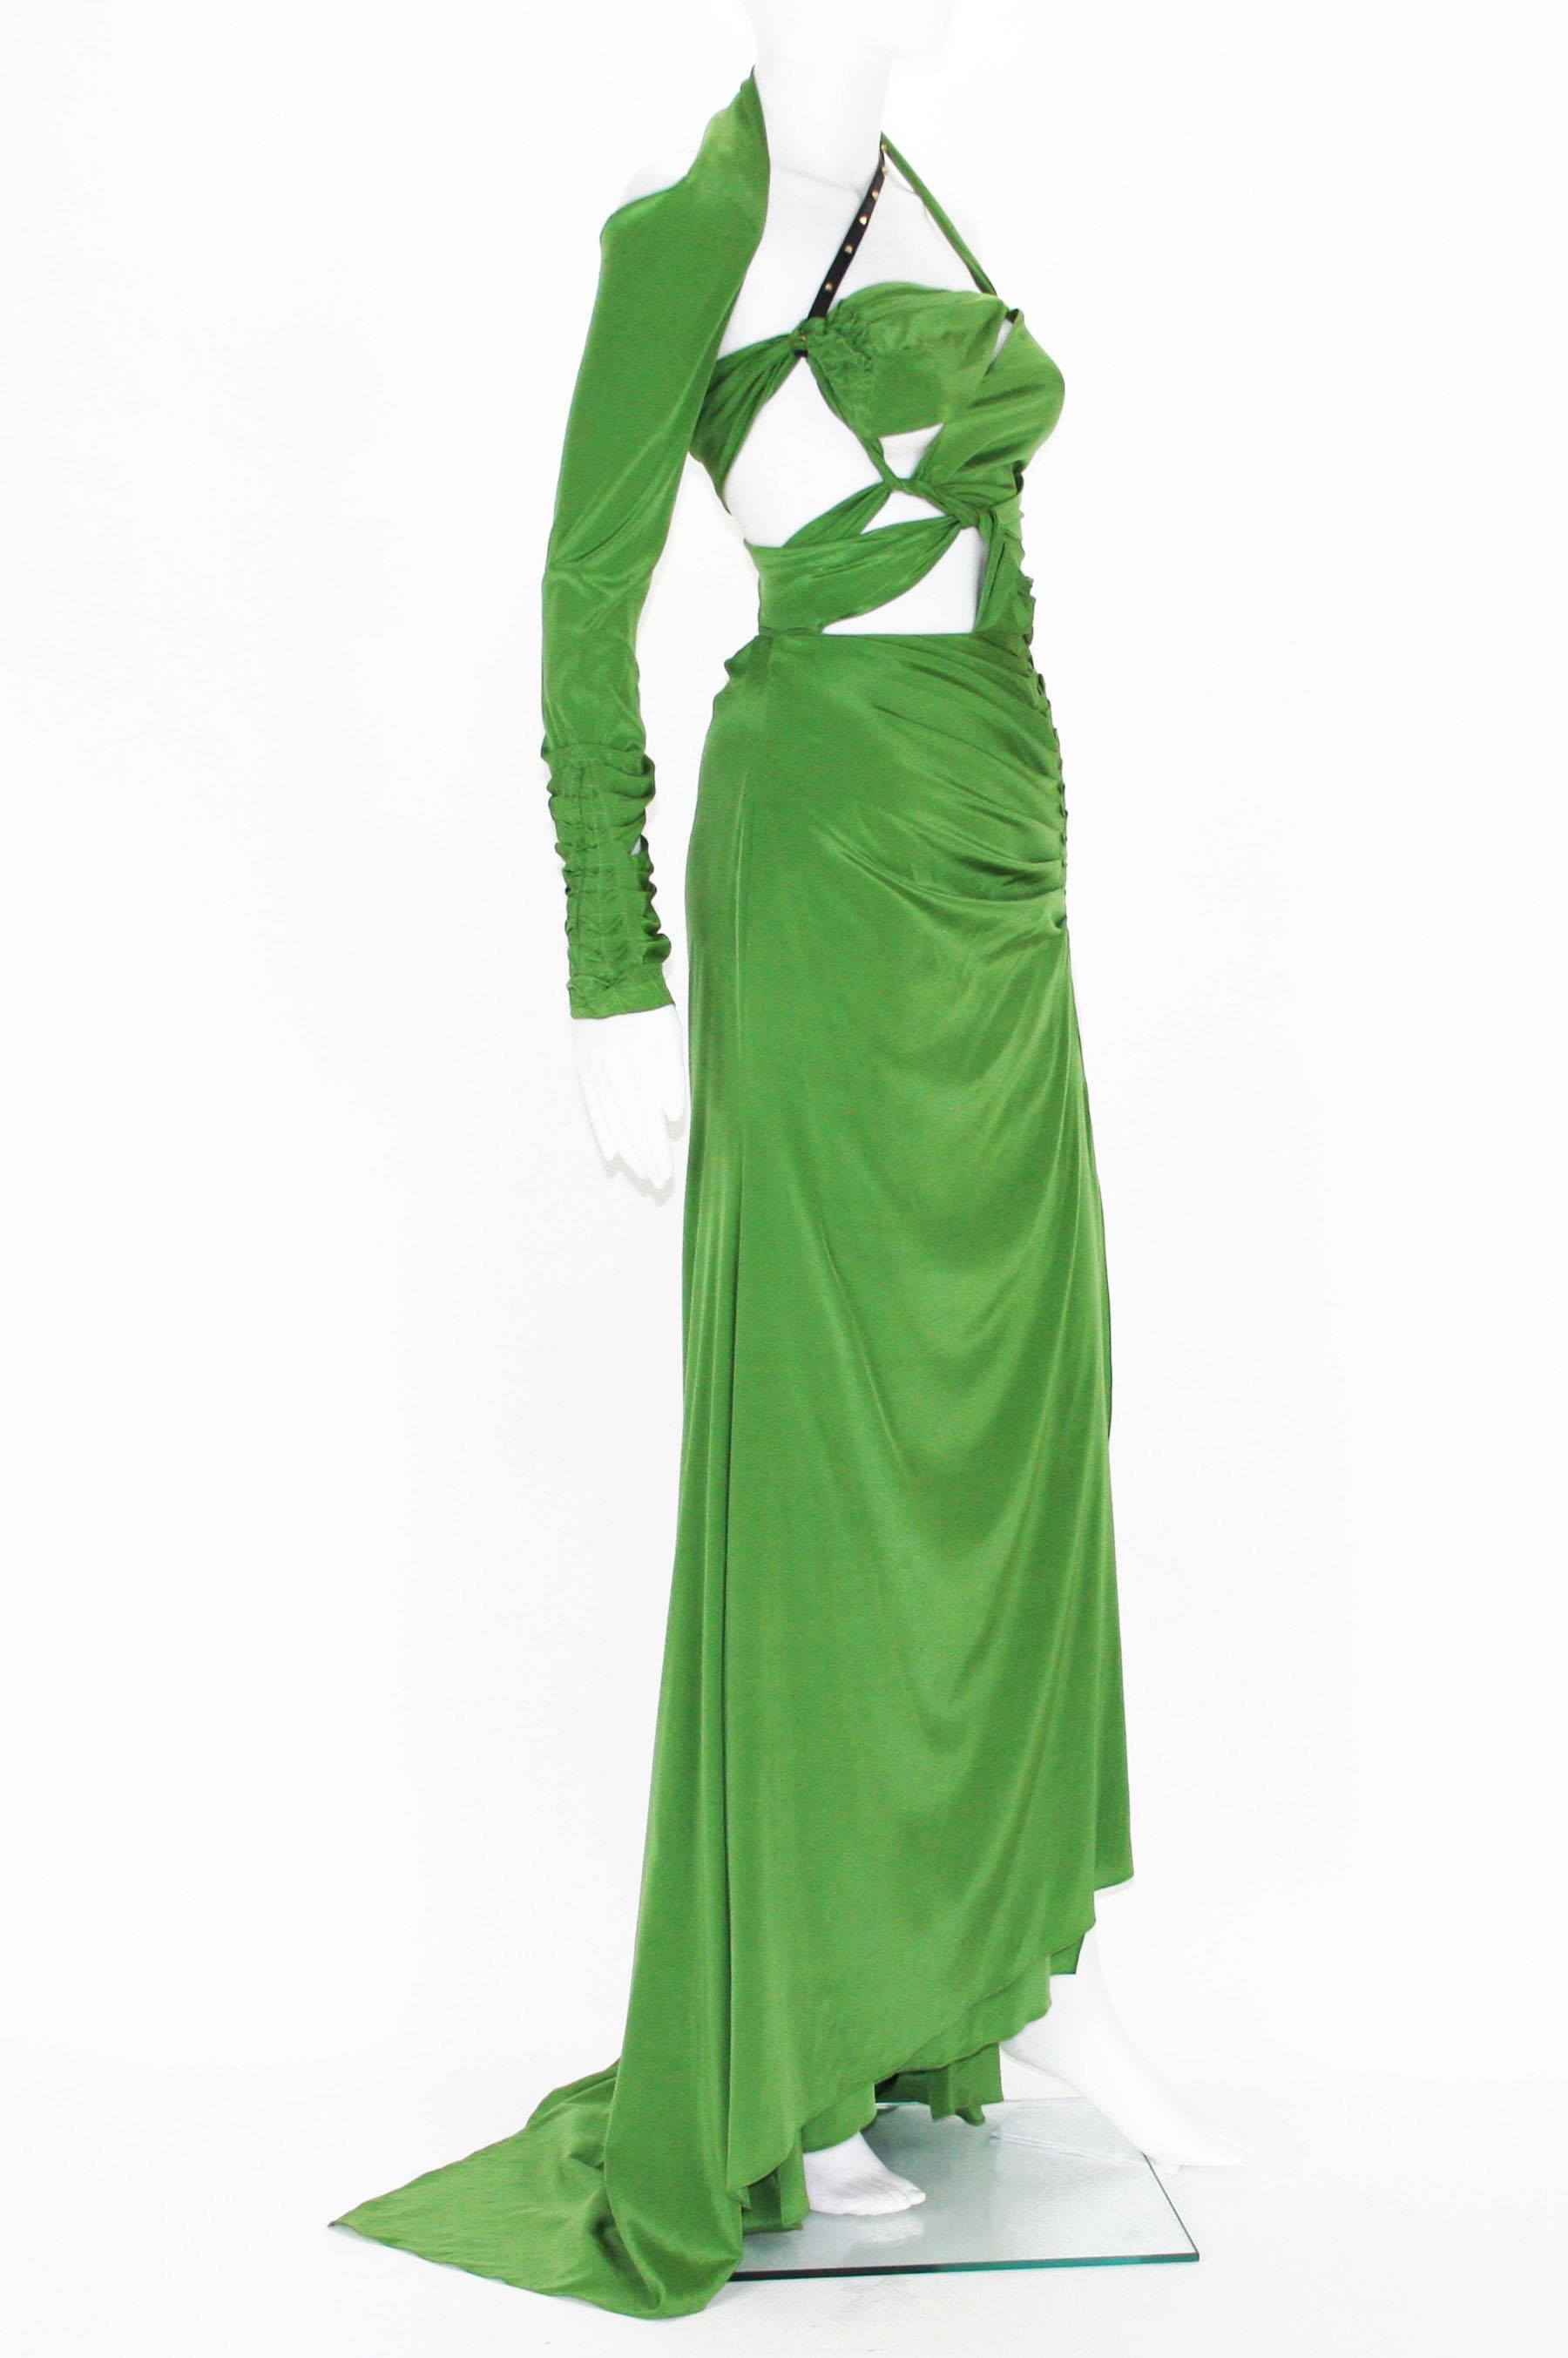 Tom Ford for Gucci Silk Green Bondage Long Dress Gown
2003 Collection, Limited Edition.
Designer size - 42 (run smaller)
85% Silk, 10% Spandex, 5% Leather.
Cut-out and ruched design, leather studded strap, high slit, side zip closure, very